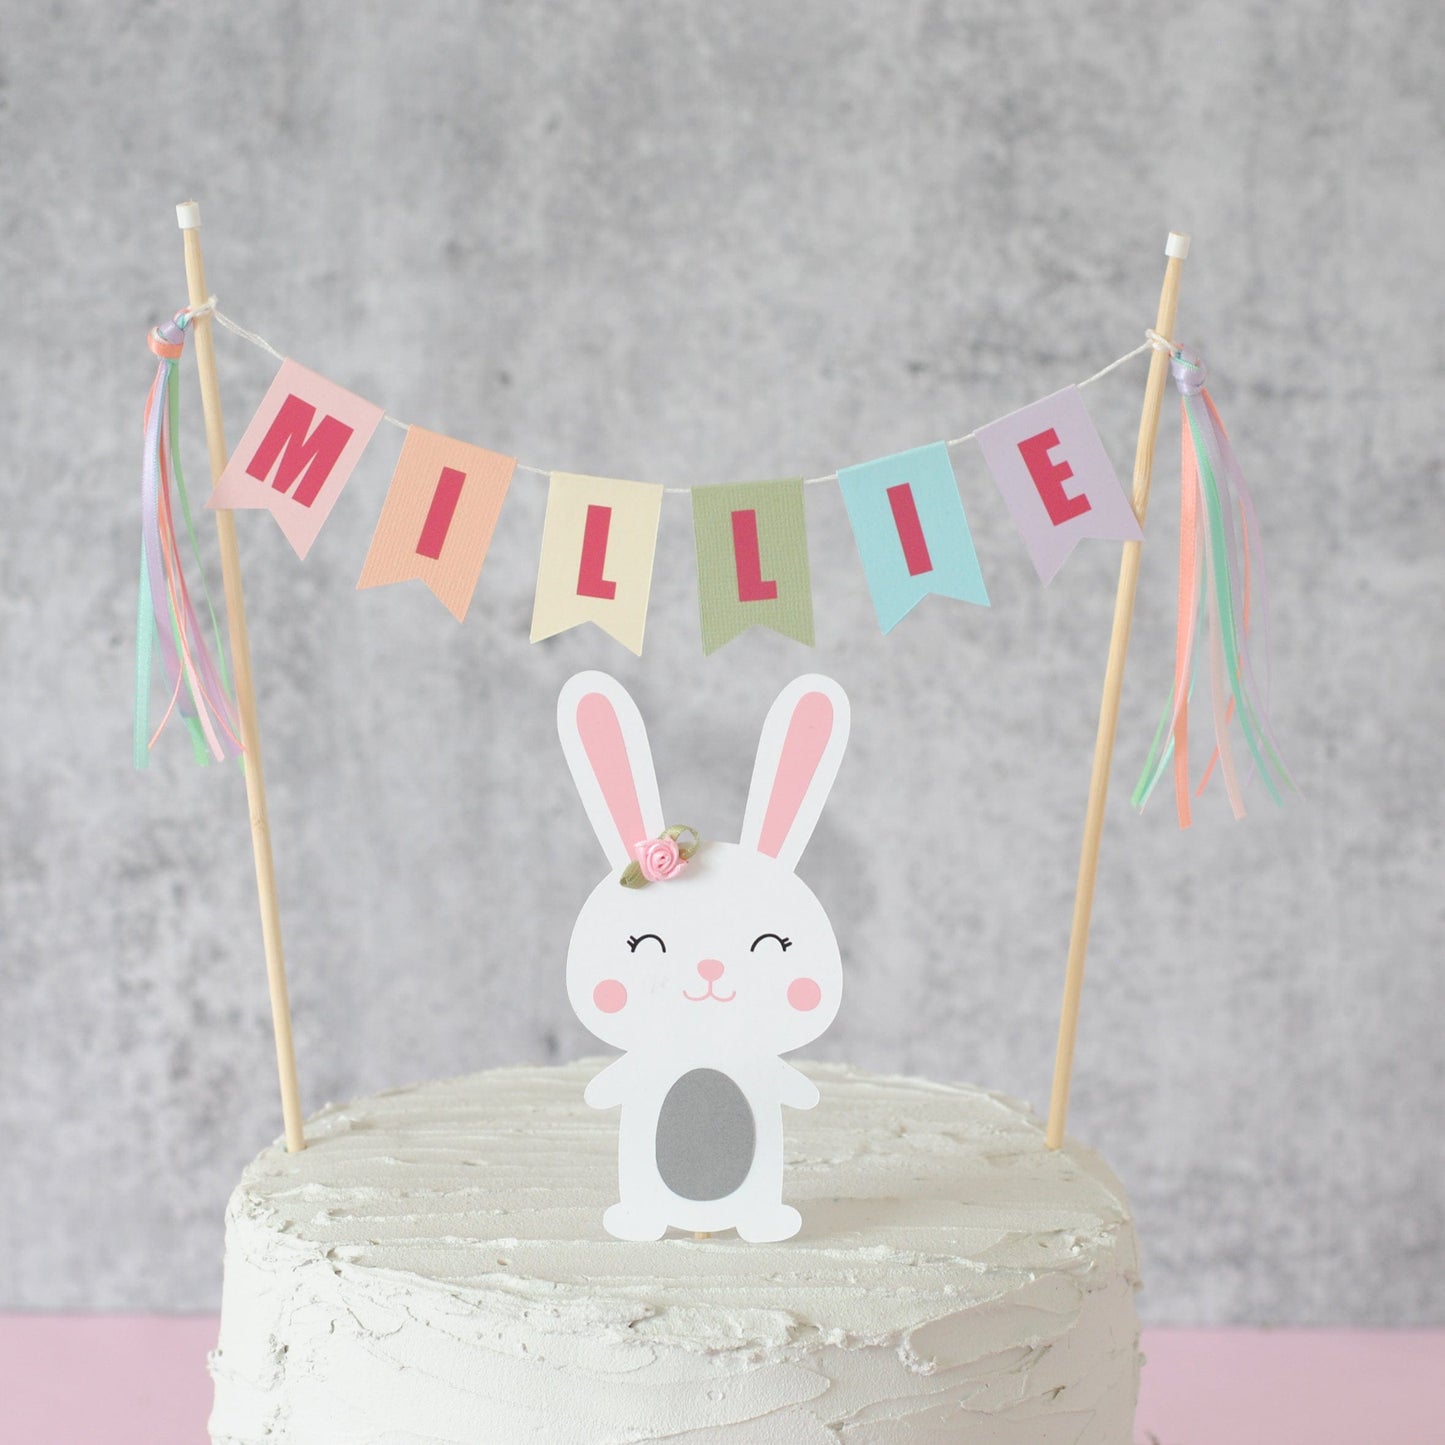 1st Birthday Cake With Bunny Topper - Mel's Amazing Cakes